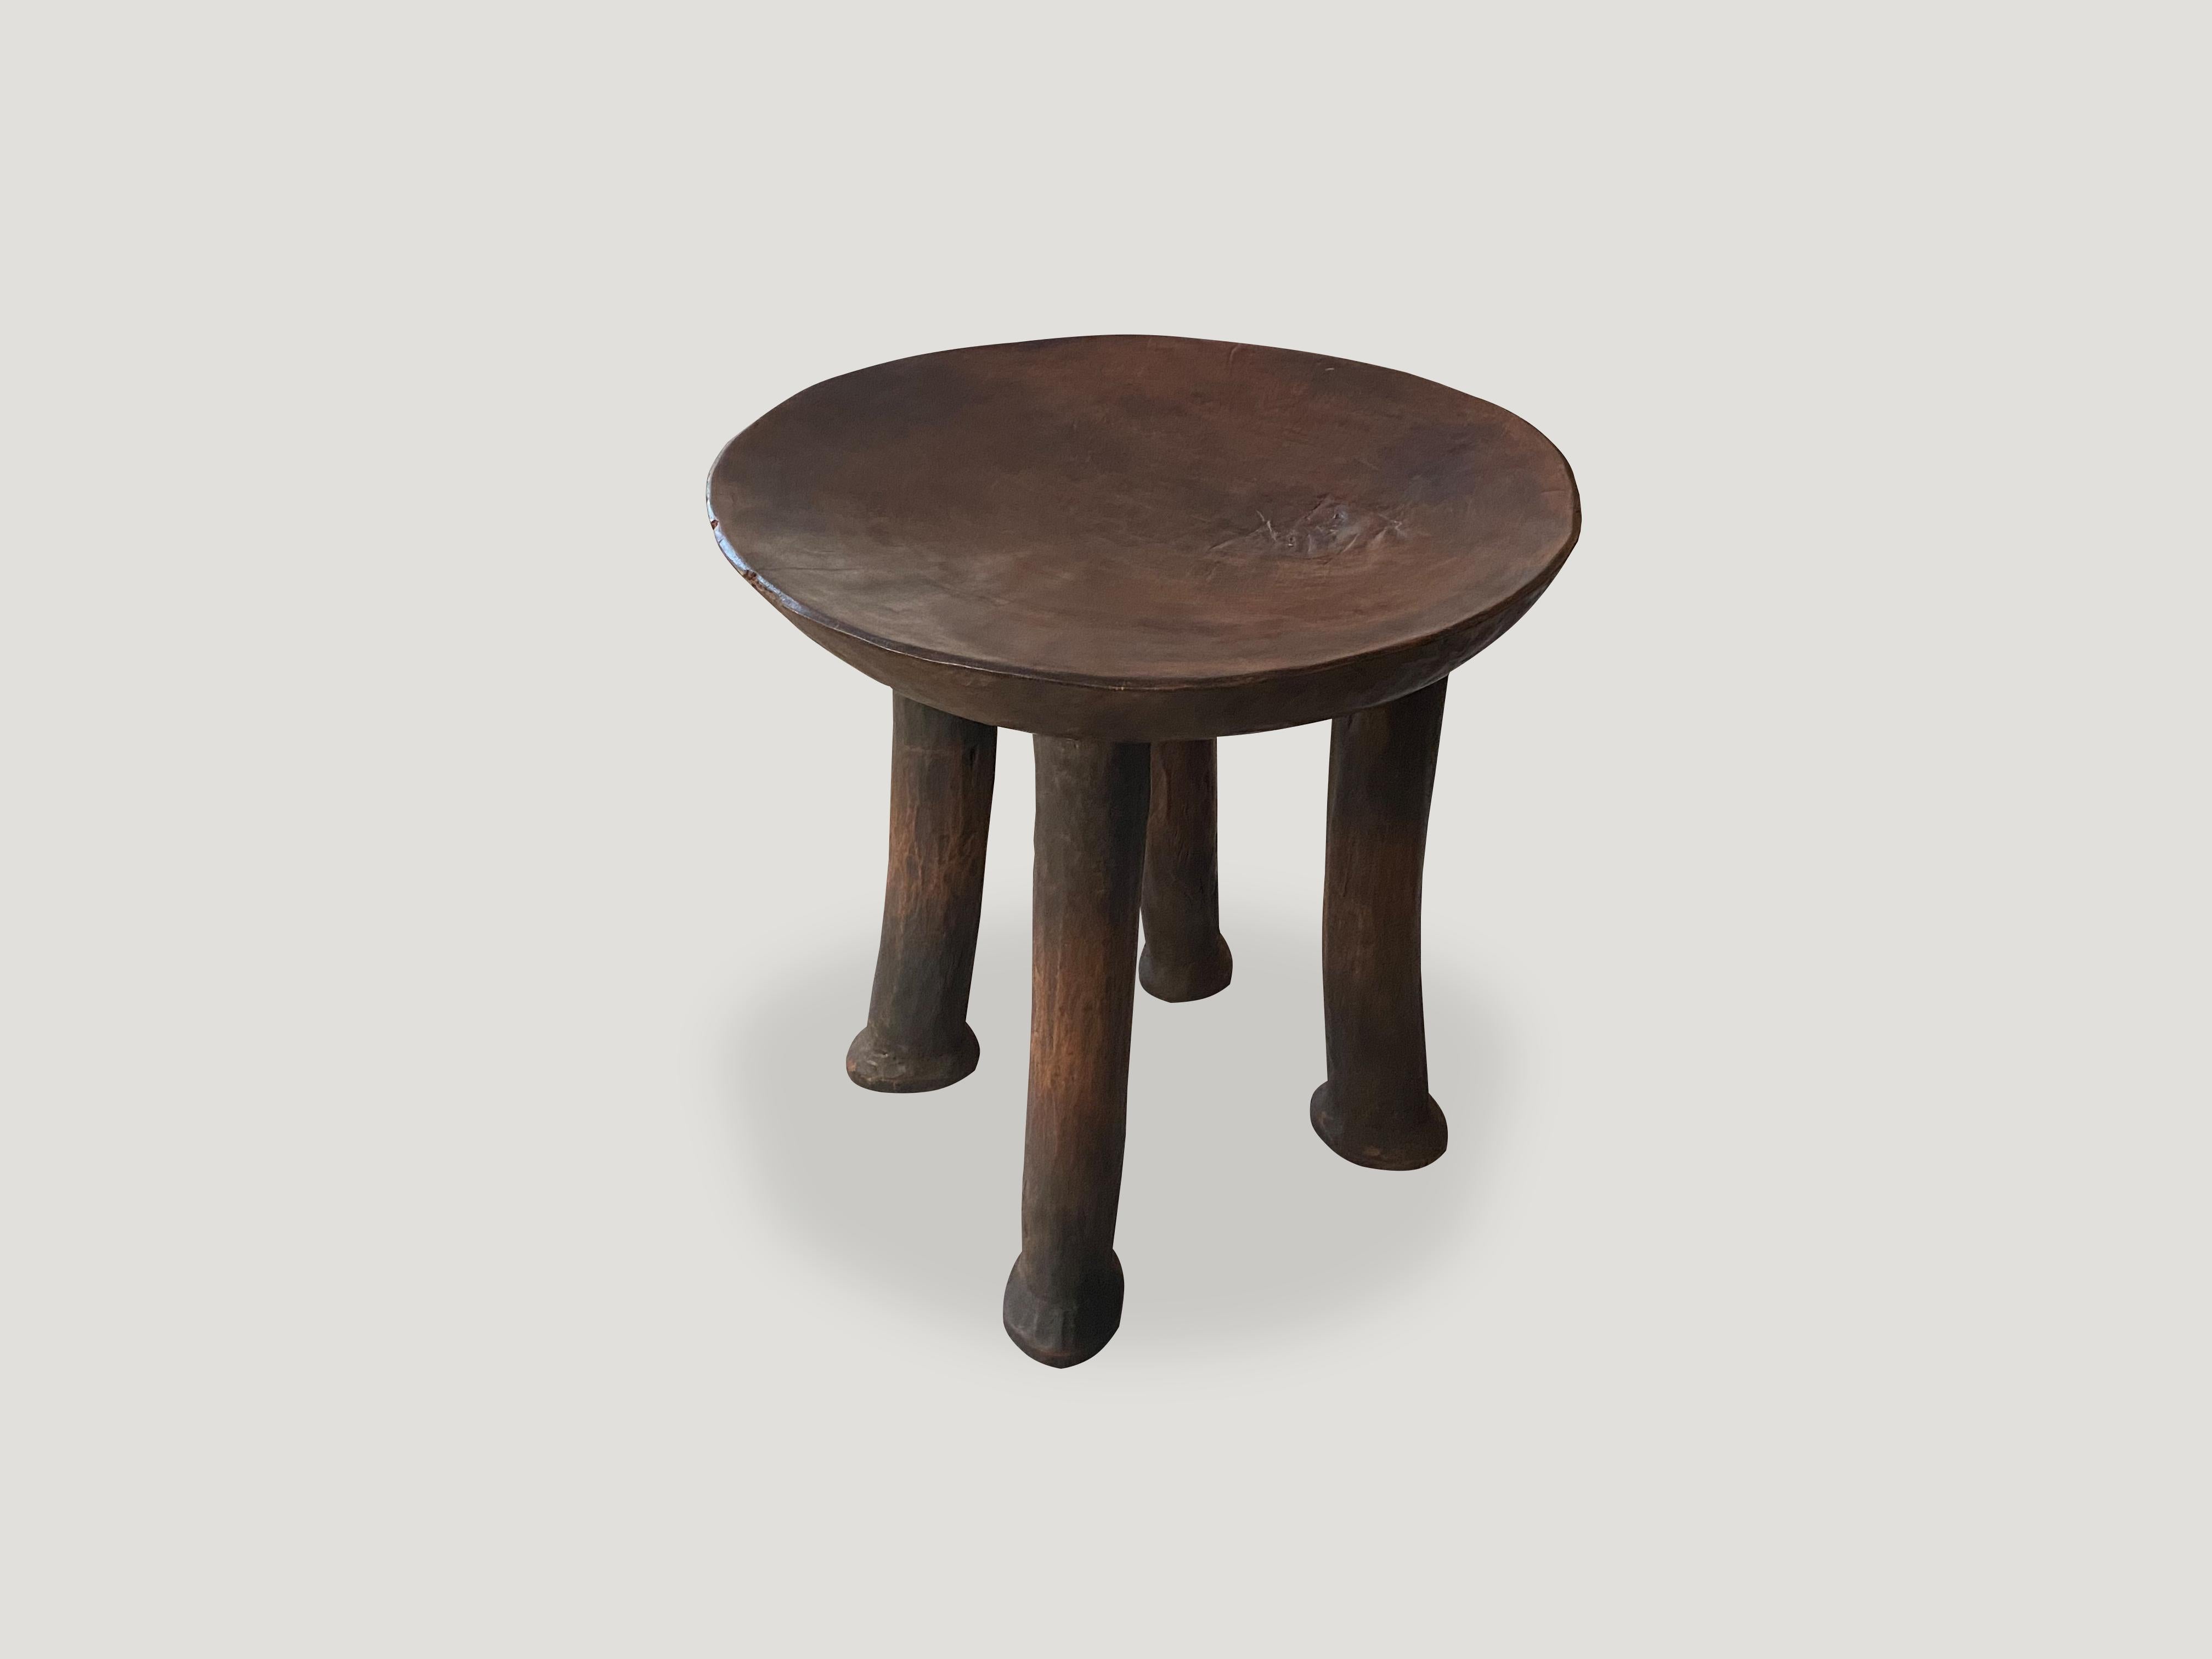 Sculptural African mahogany stool or side table with a beautiful half drum hand carved top. Great for placing a book or perhaps towels in a bathroom, magazines etc.

This stool or side table was sourced in the spirit of wabi-sabi, a Japanese